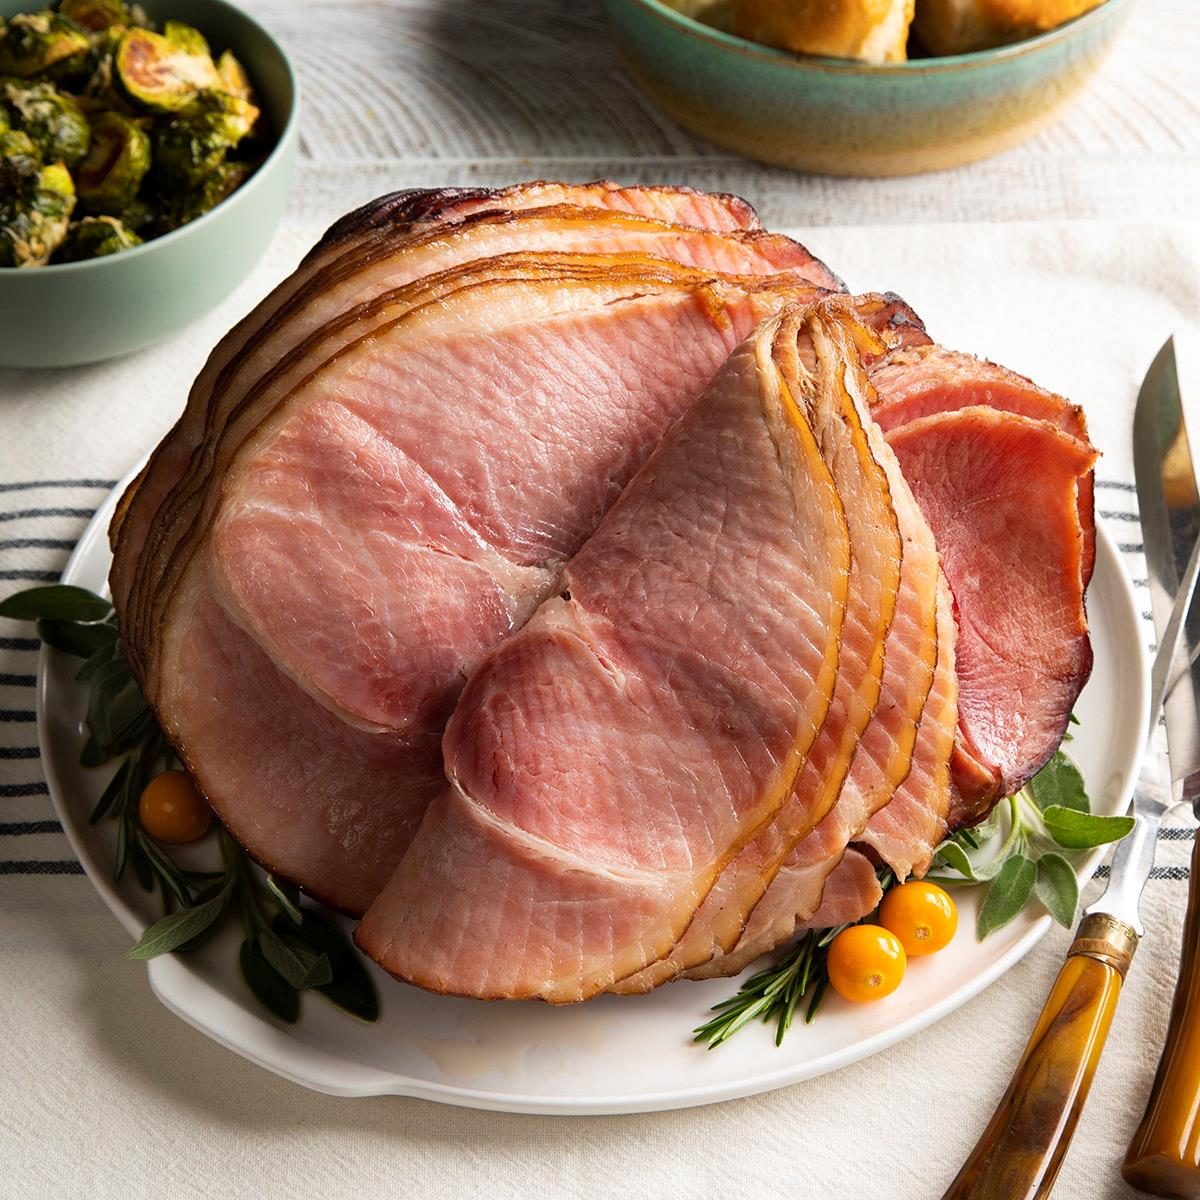 Baked Spiral Ham Recipe: How to Make It